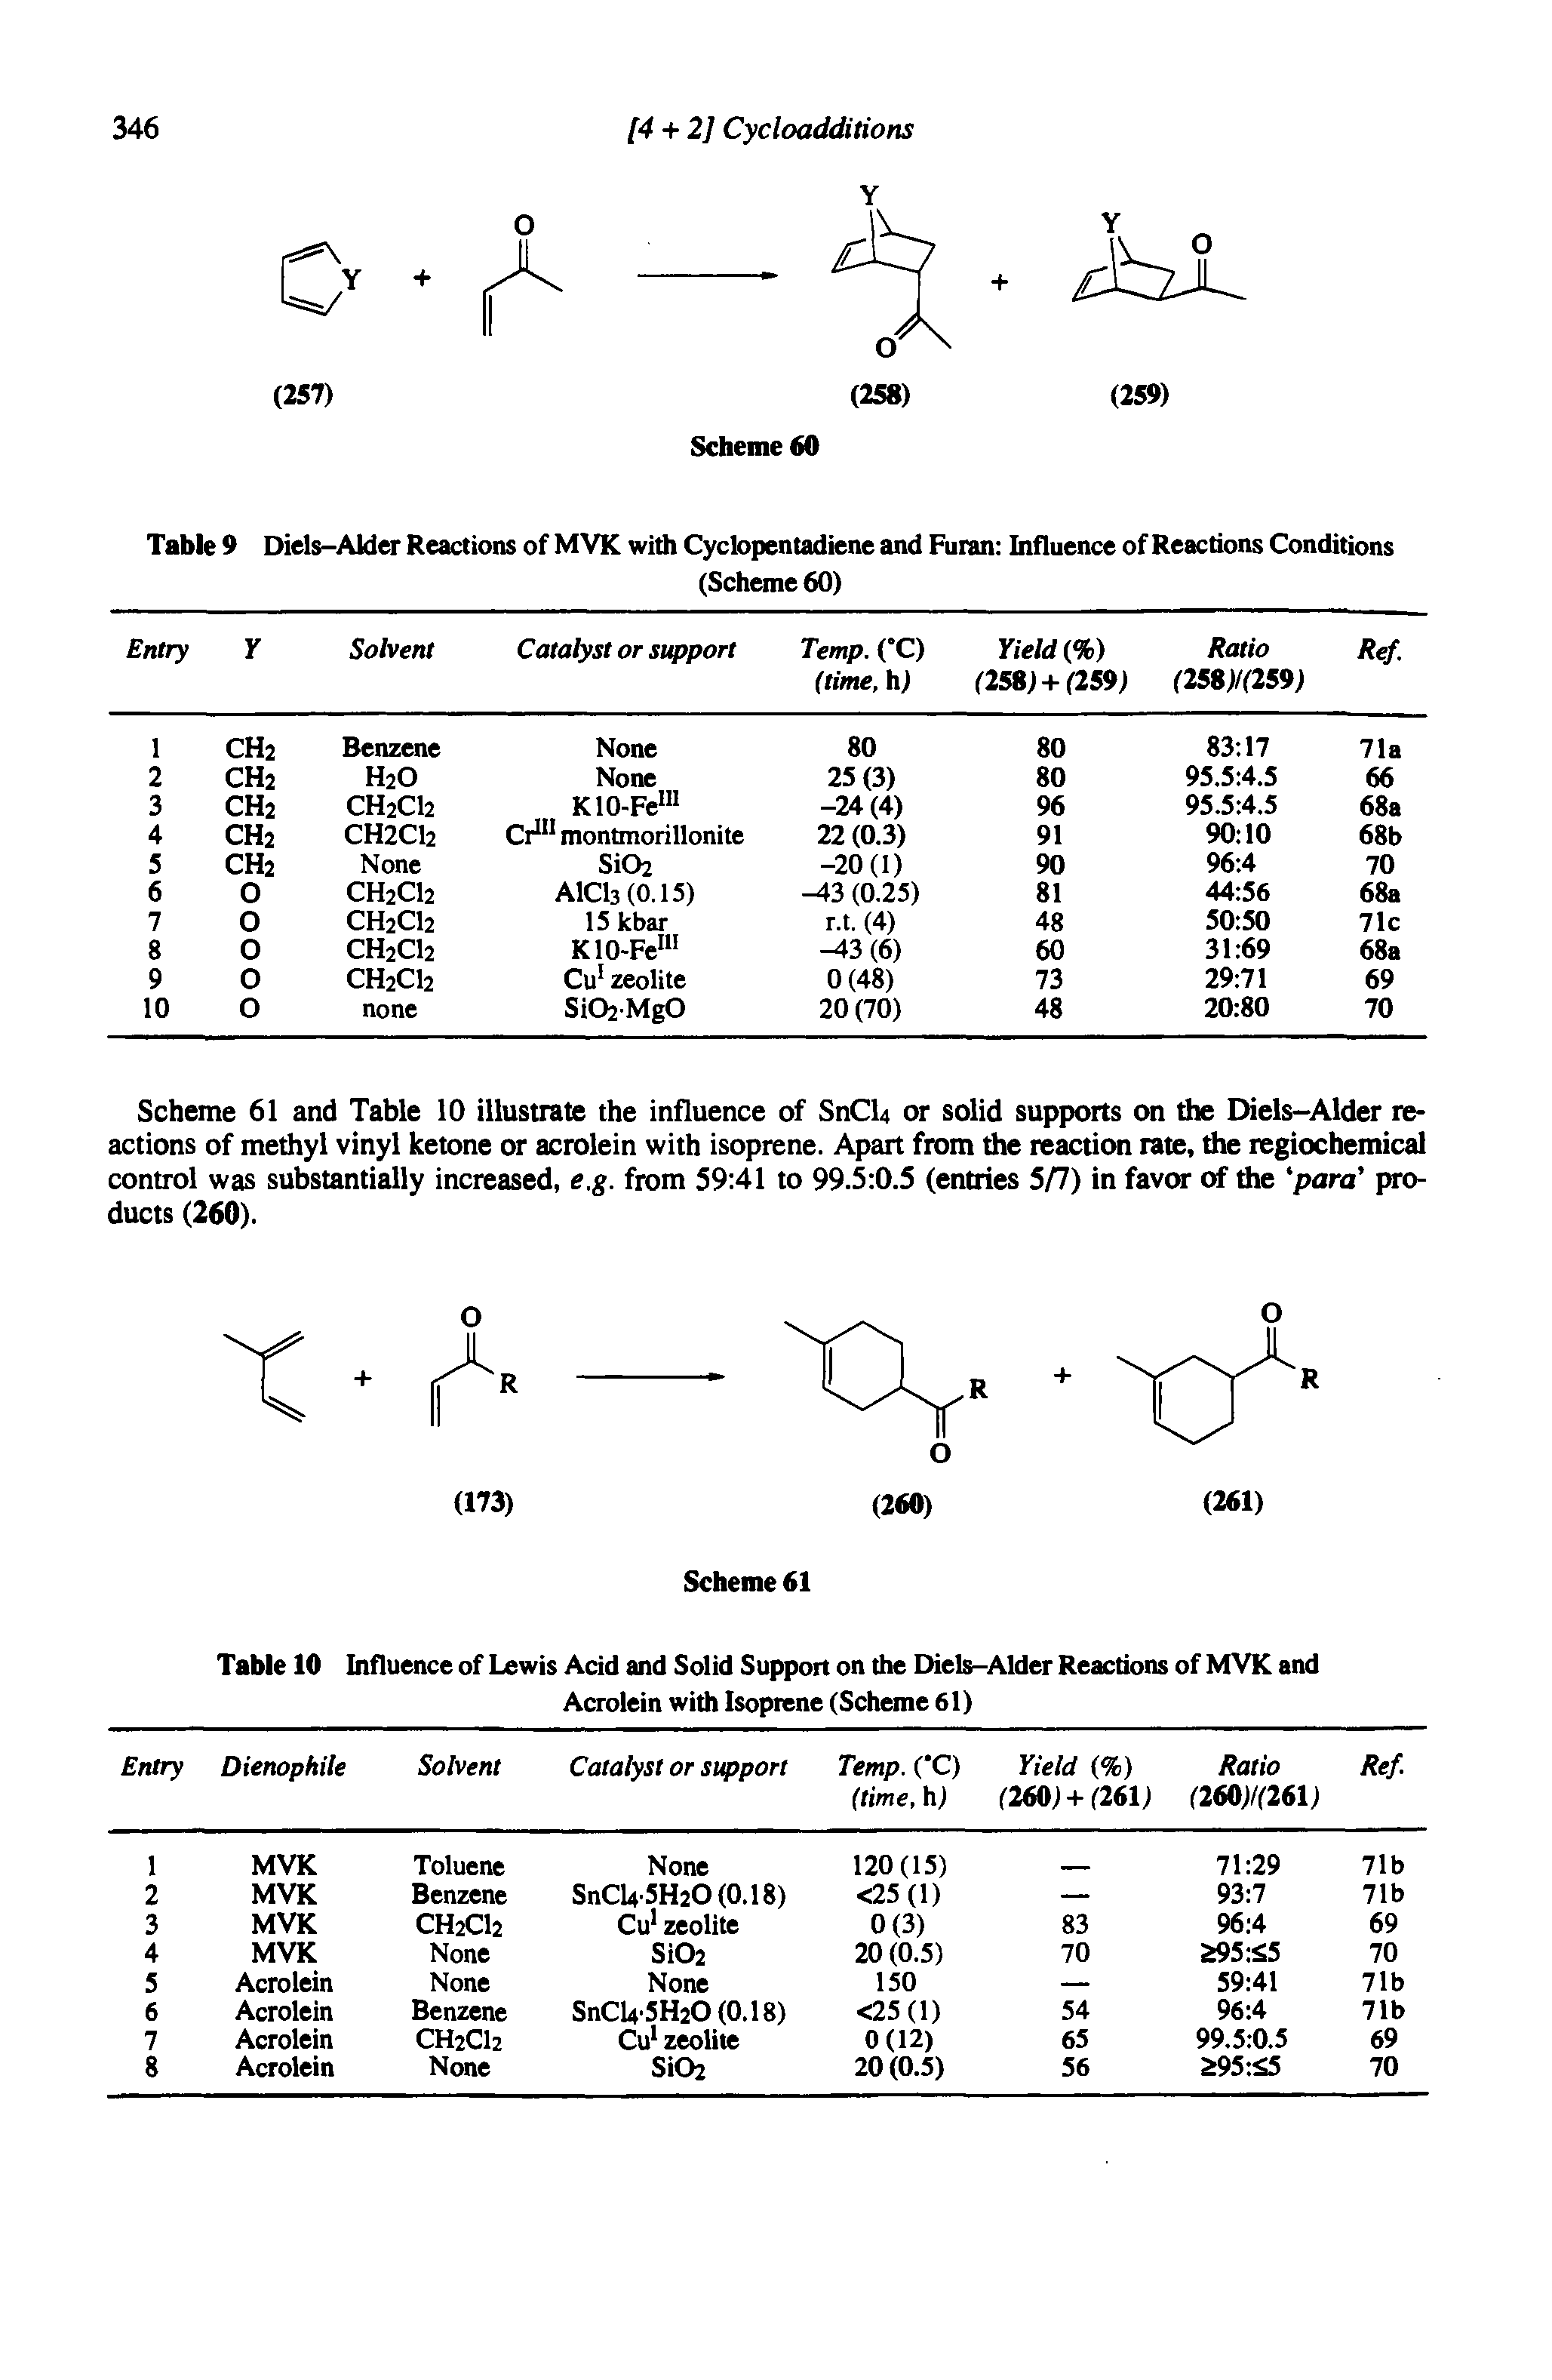 Table 9 Diels-Akler Reactions of M VK with Cyclopentadiene and Furan Influence of Reactions Conditions...